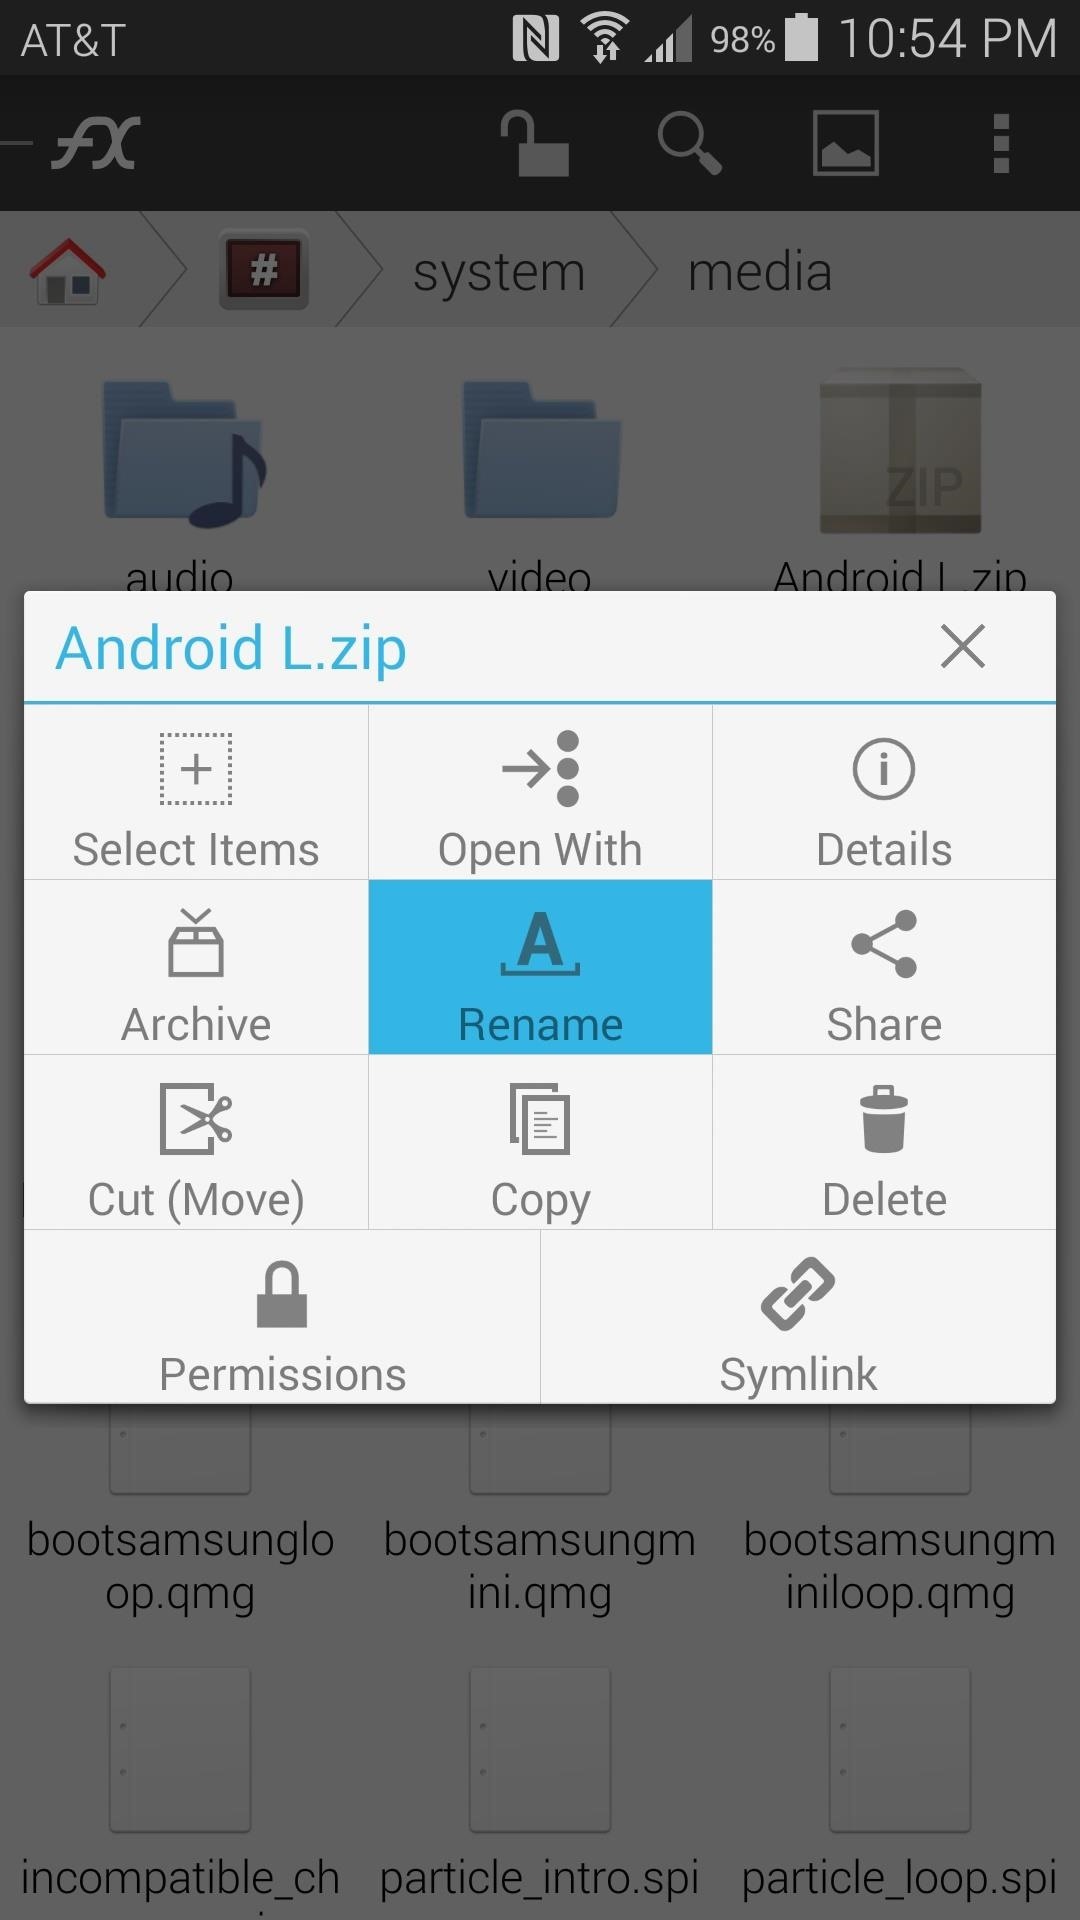 Easily Change Boot Animations on Your Samsung Galaxy S5